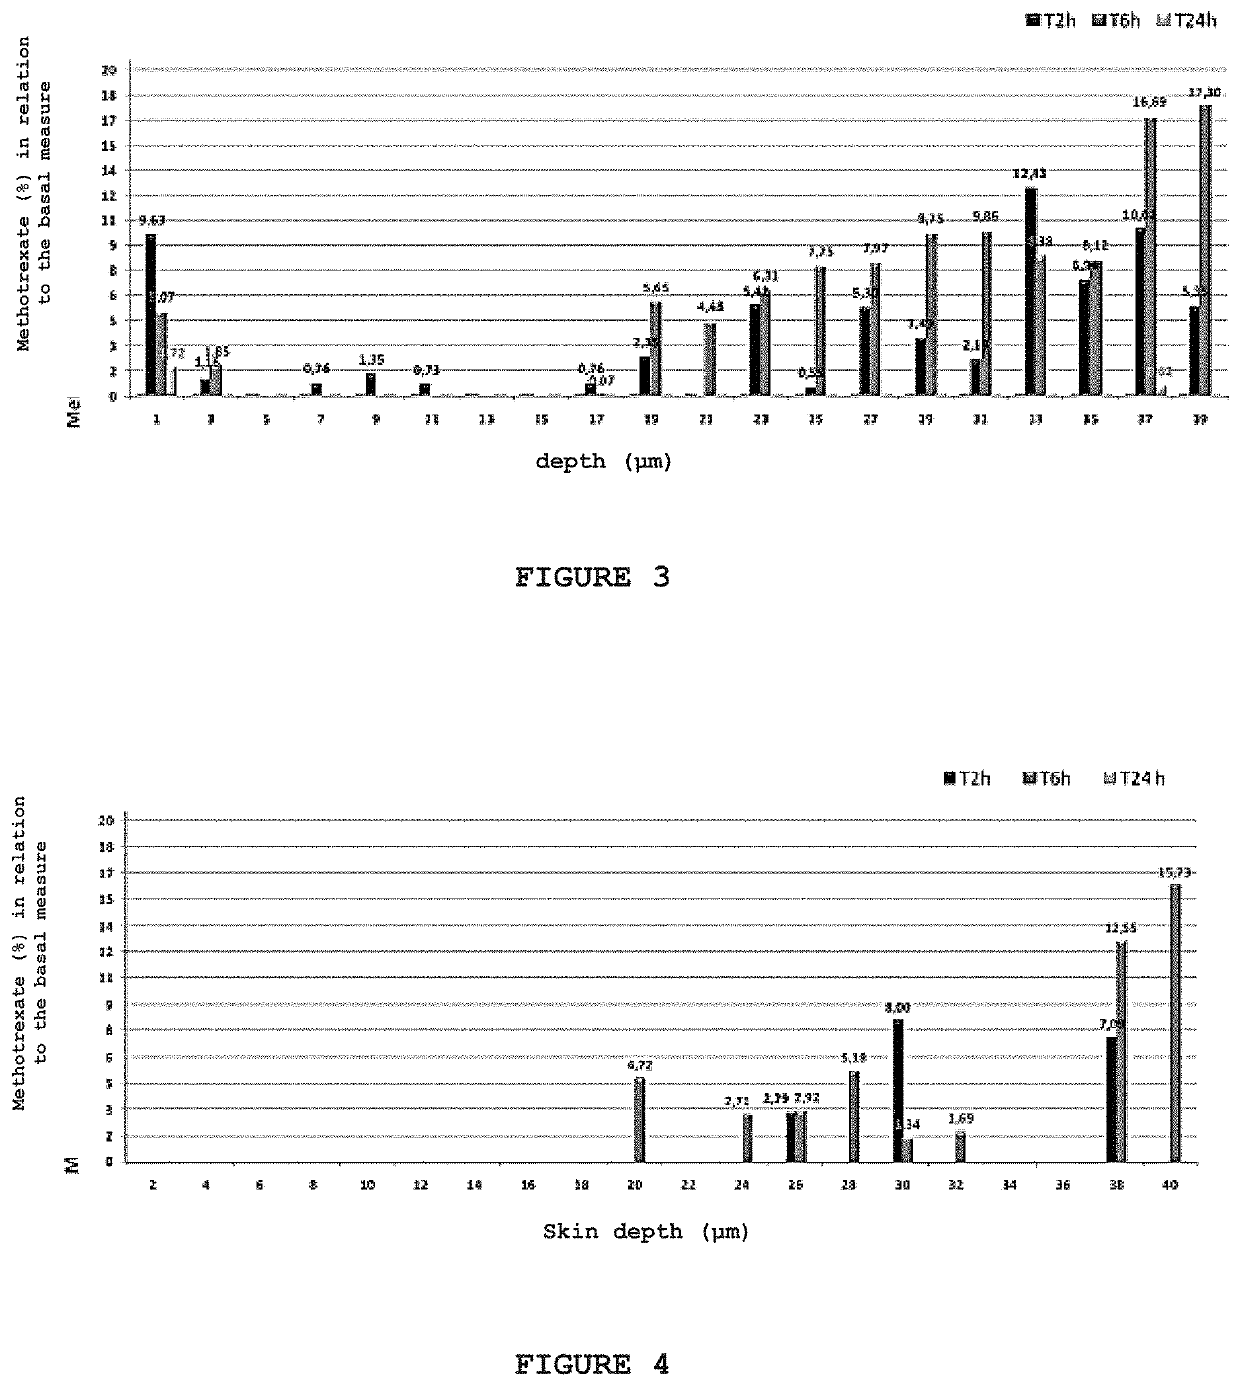 Topical pharmaceutical composition, method for producing the topical pharmaceutical composition, use of topical pharmaceutical composition and method for topical treatment of psoriasis, atopic dermatitis or chronic eczema